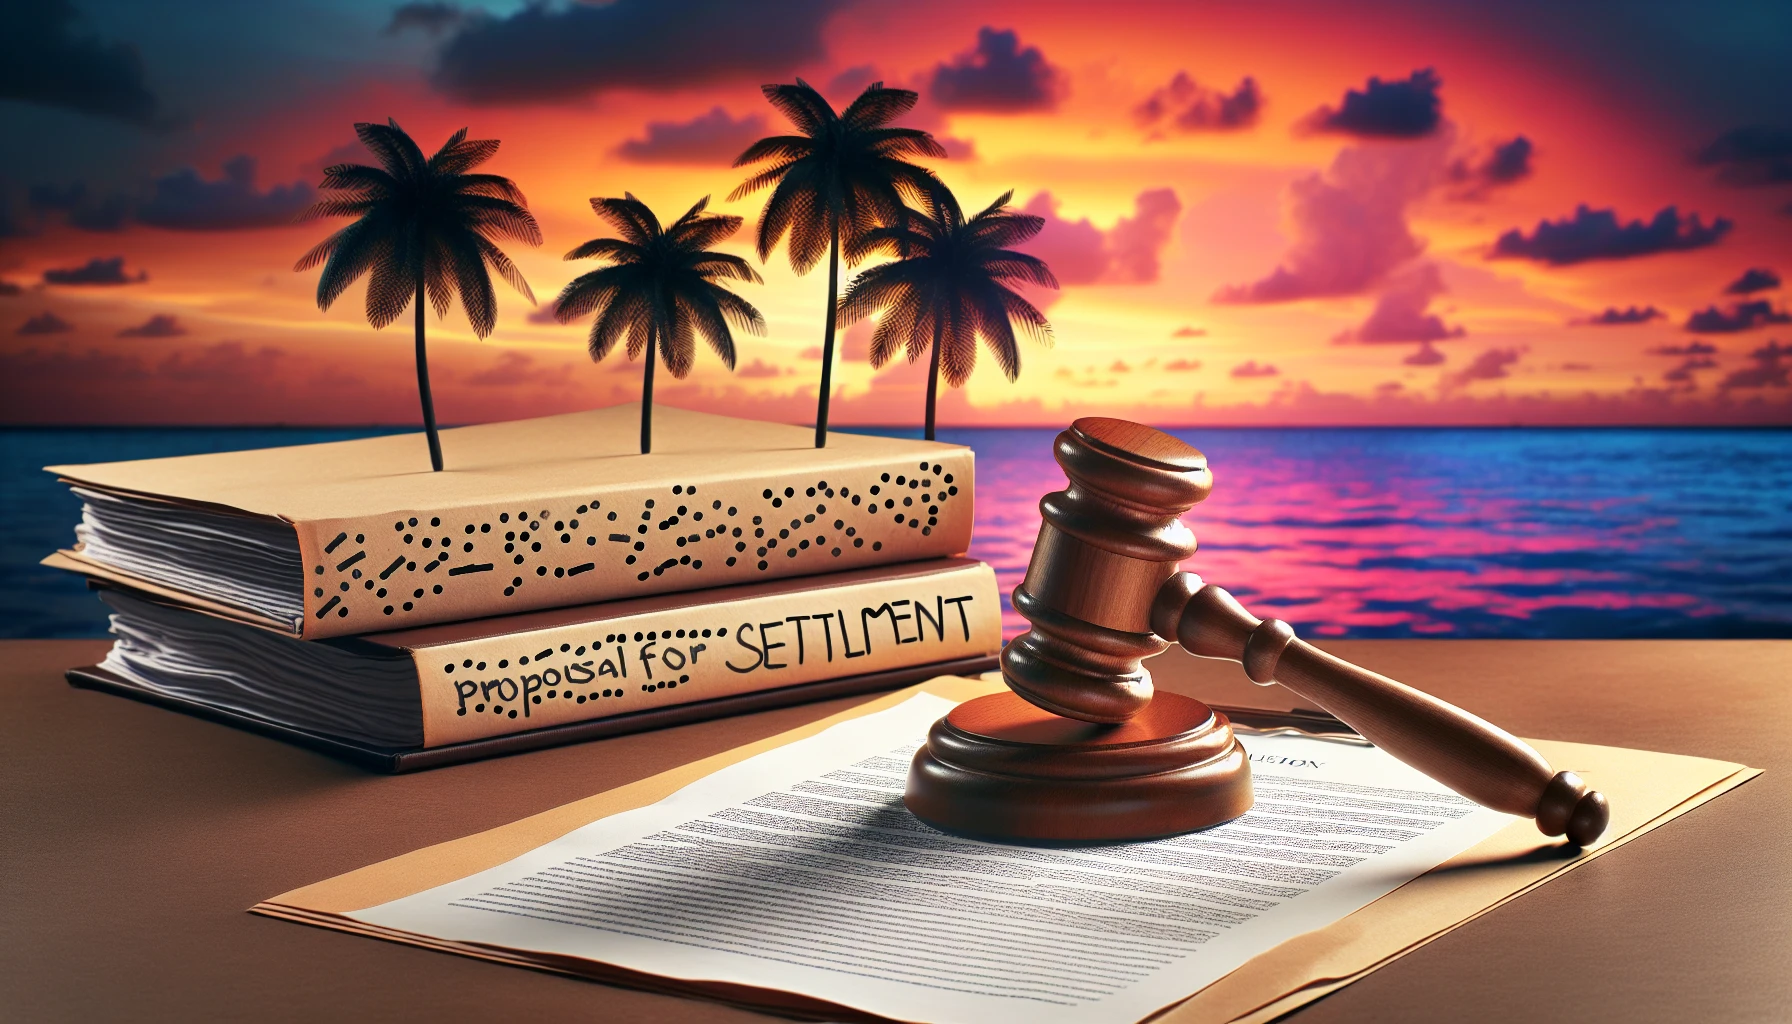 Illustration of legal documents and a gavel representing the Proposal for Settlement process in Florida